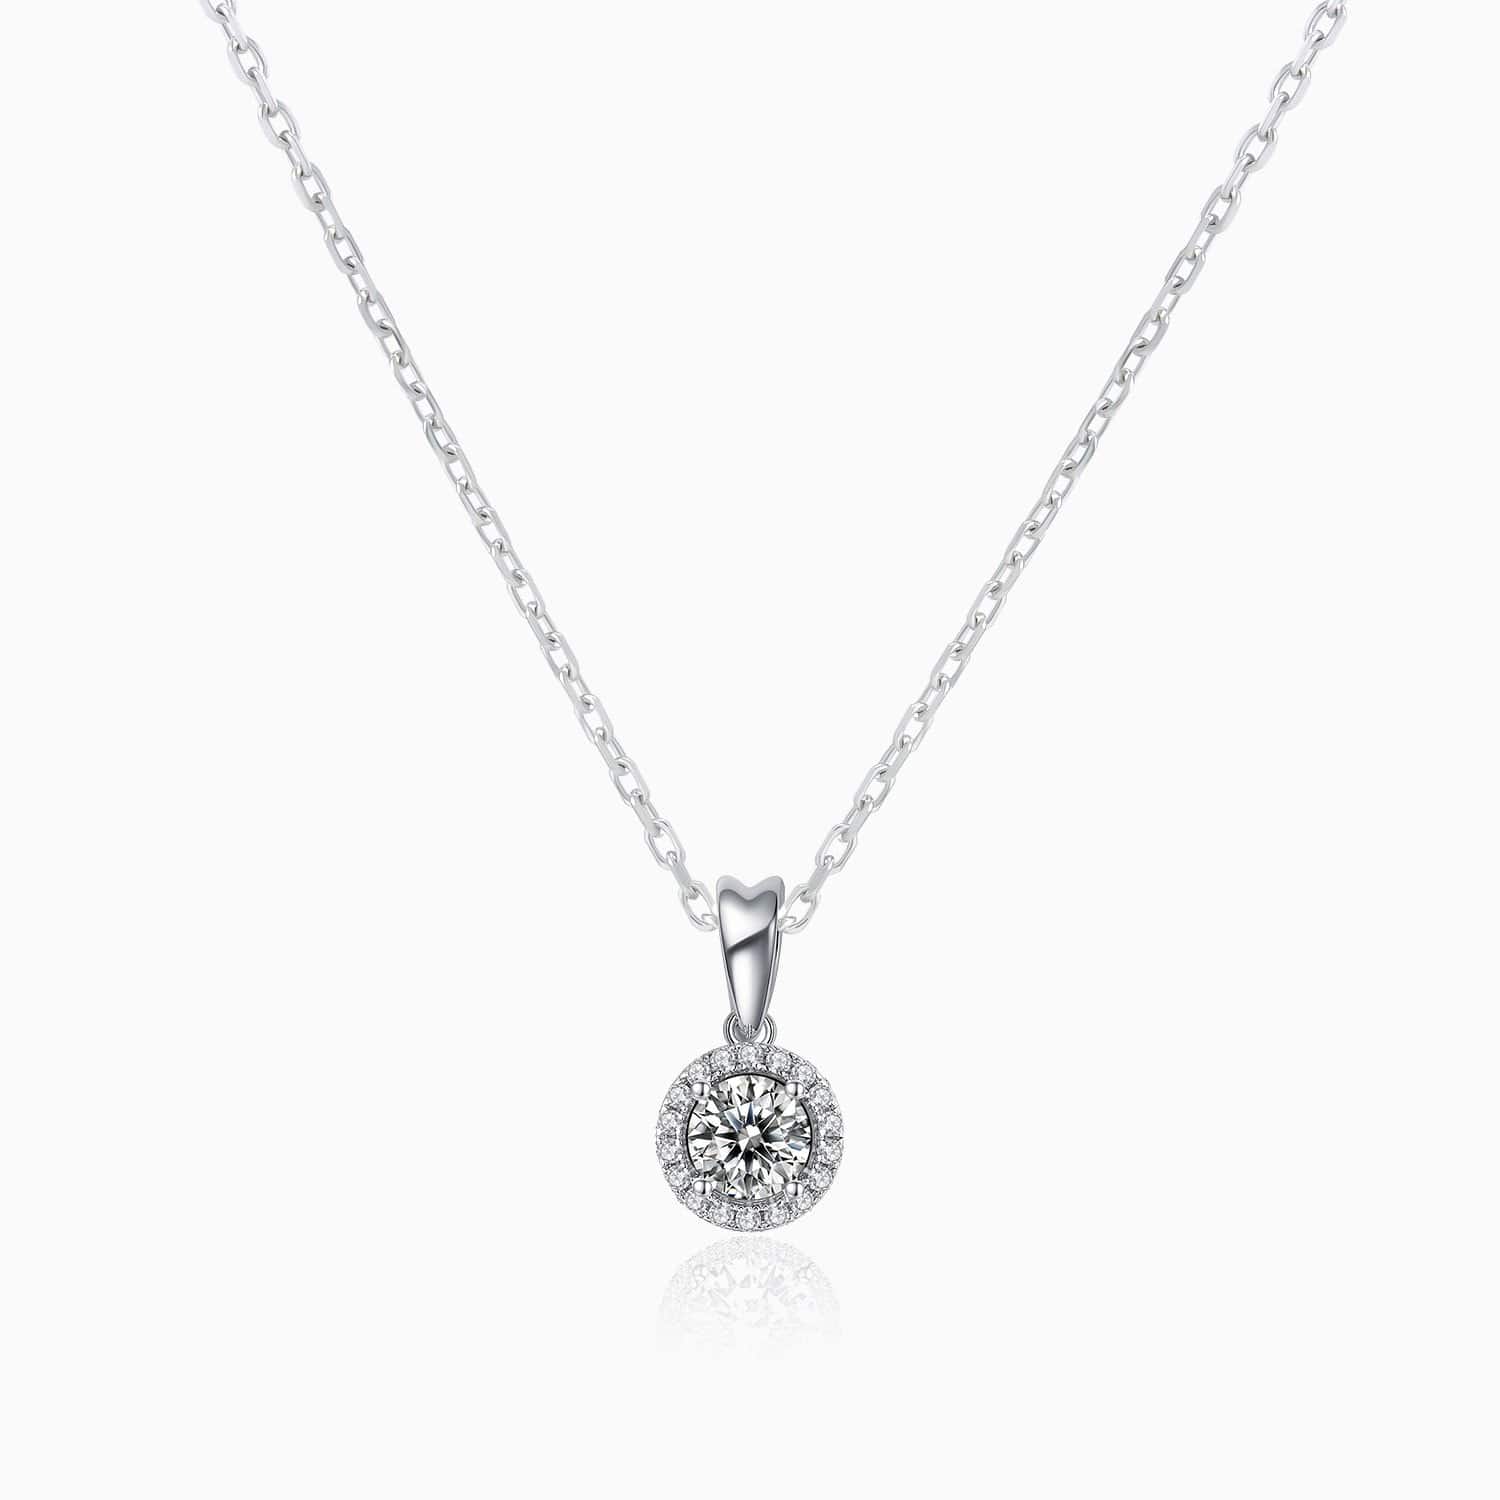 Moissanite Necklace With Halo Round Solitaire Pendant Sterling Silver 1 Carat